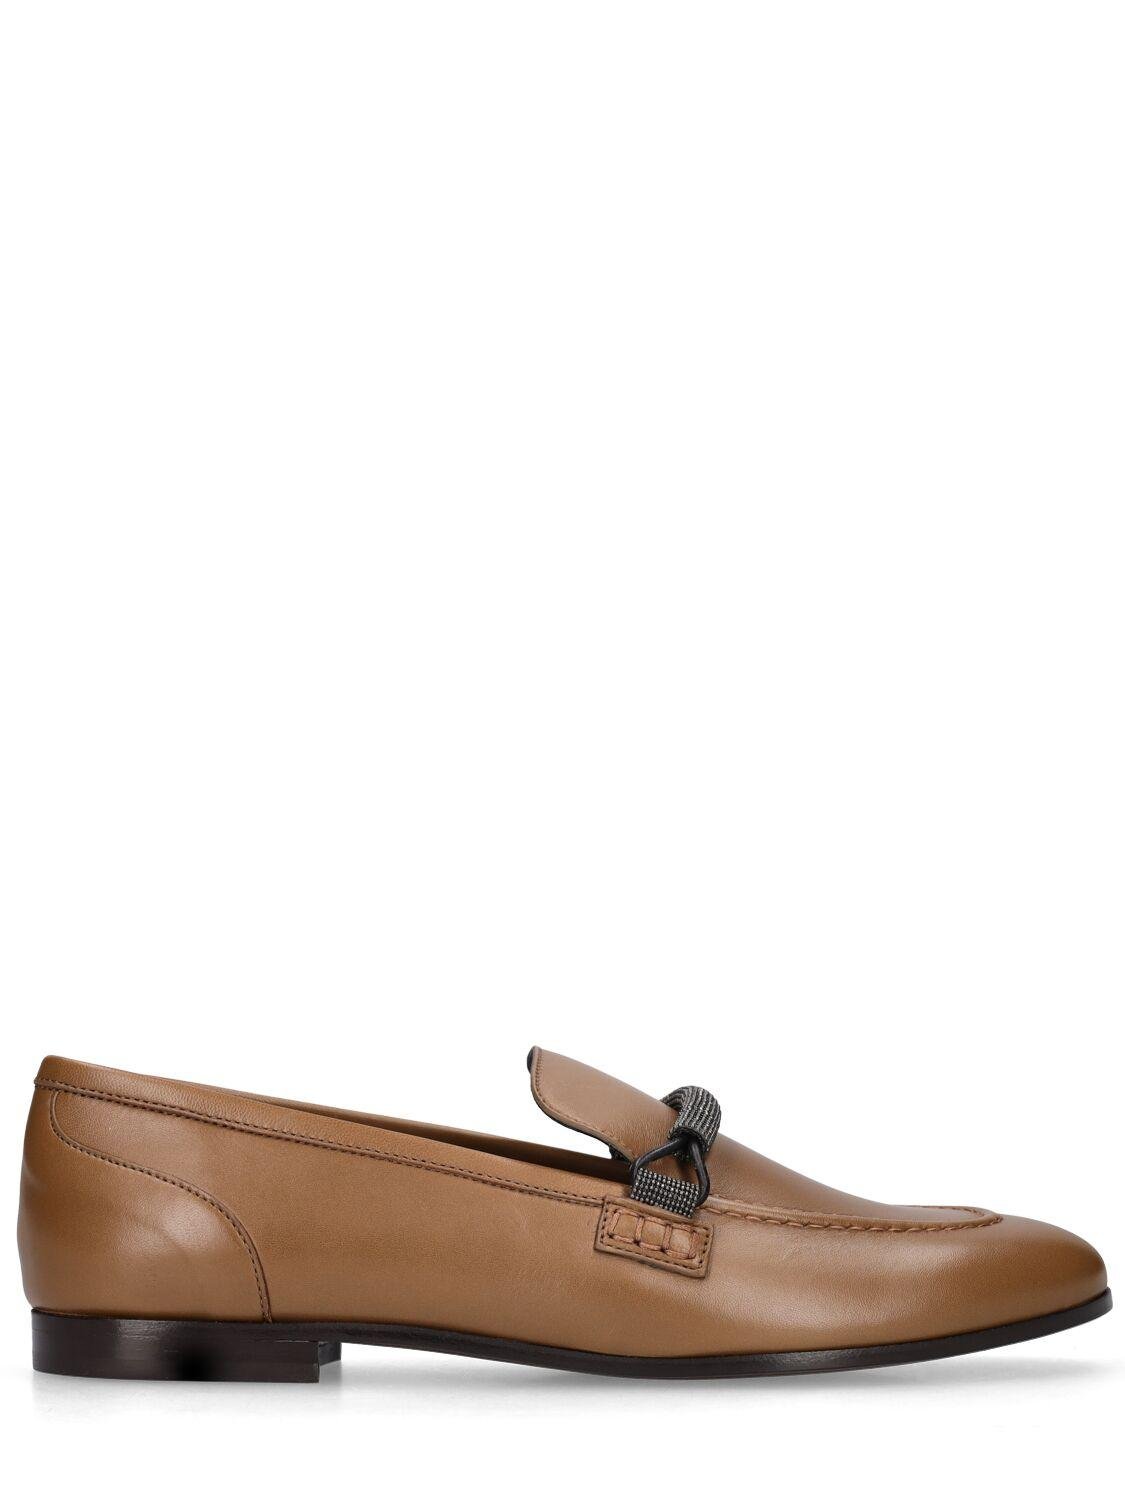 10mm Leather Loafers by BRUNELLO CUCINELLI